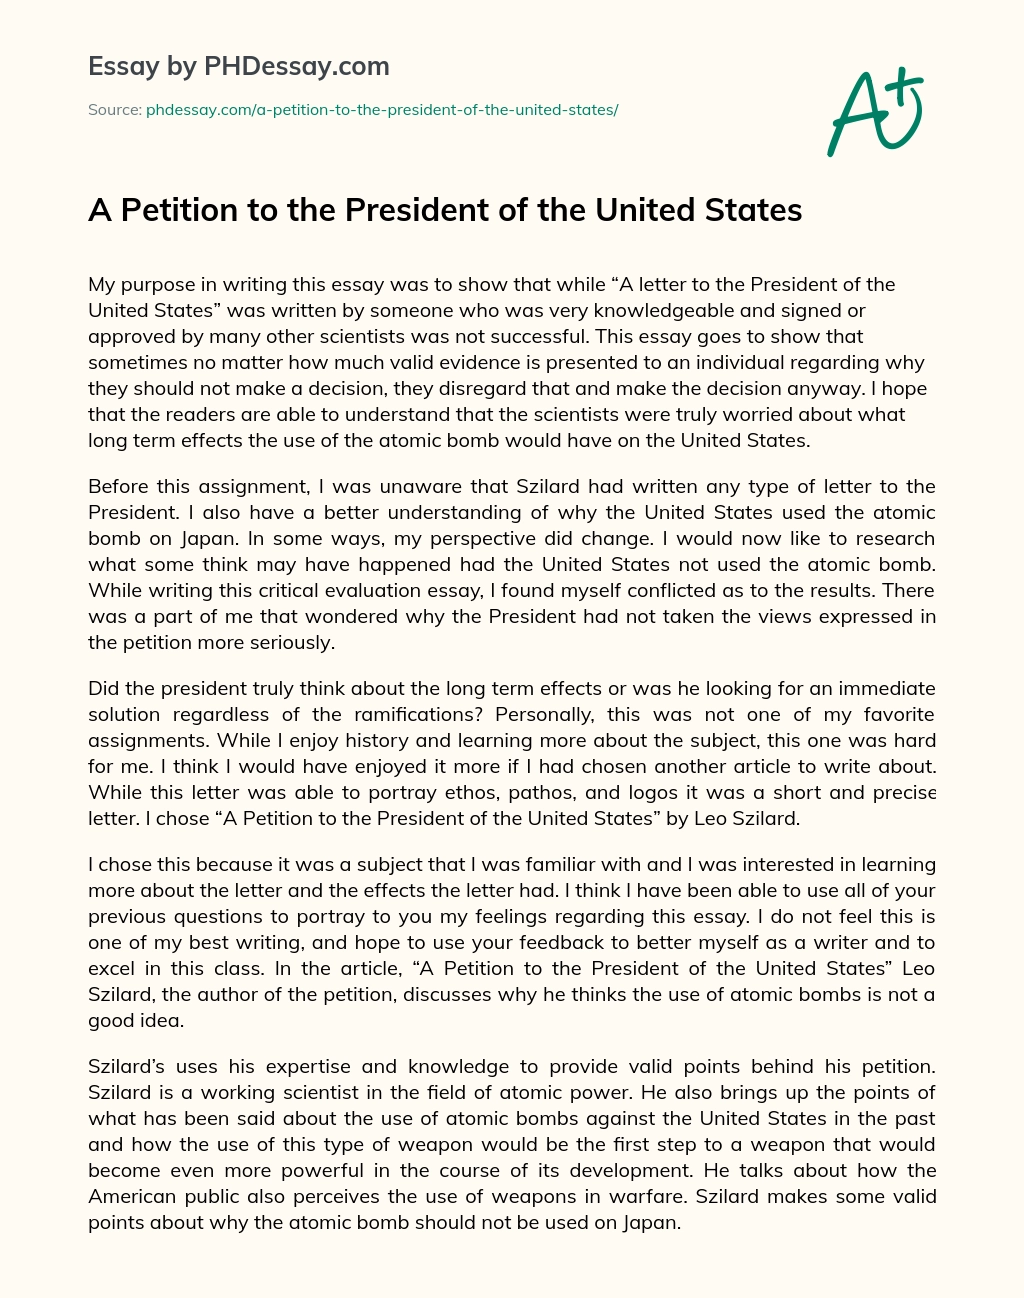 A Petition to the President of the United States essay